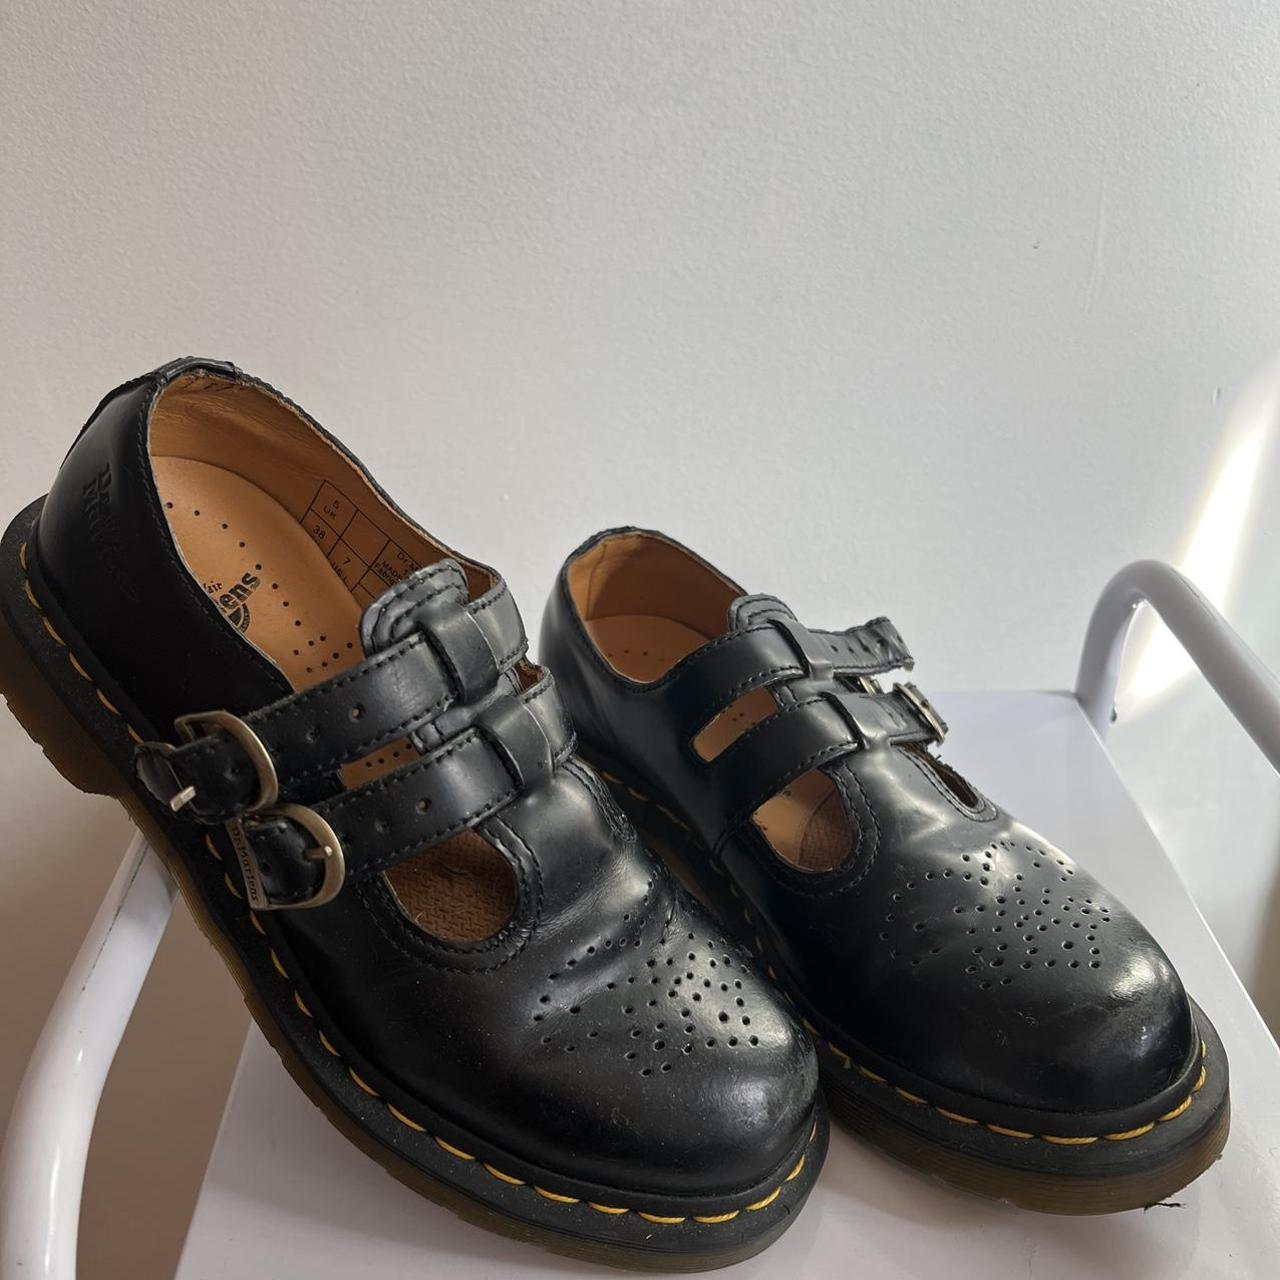 Dr. Martens Women's Loafers